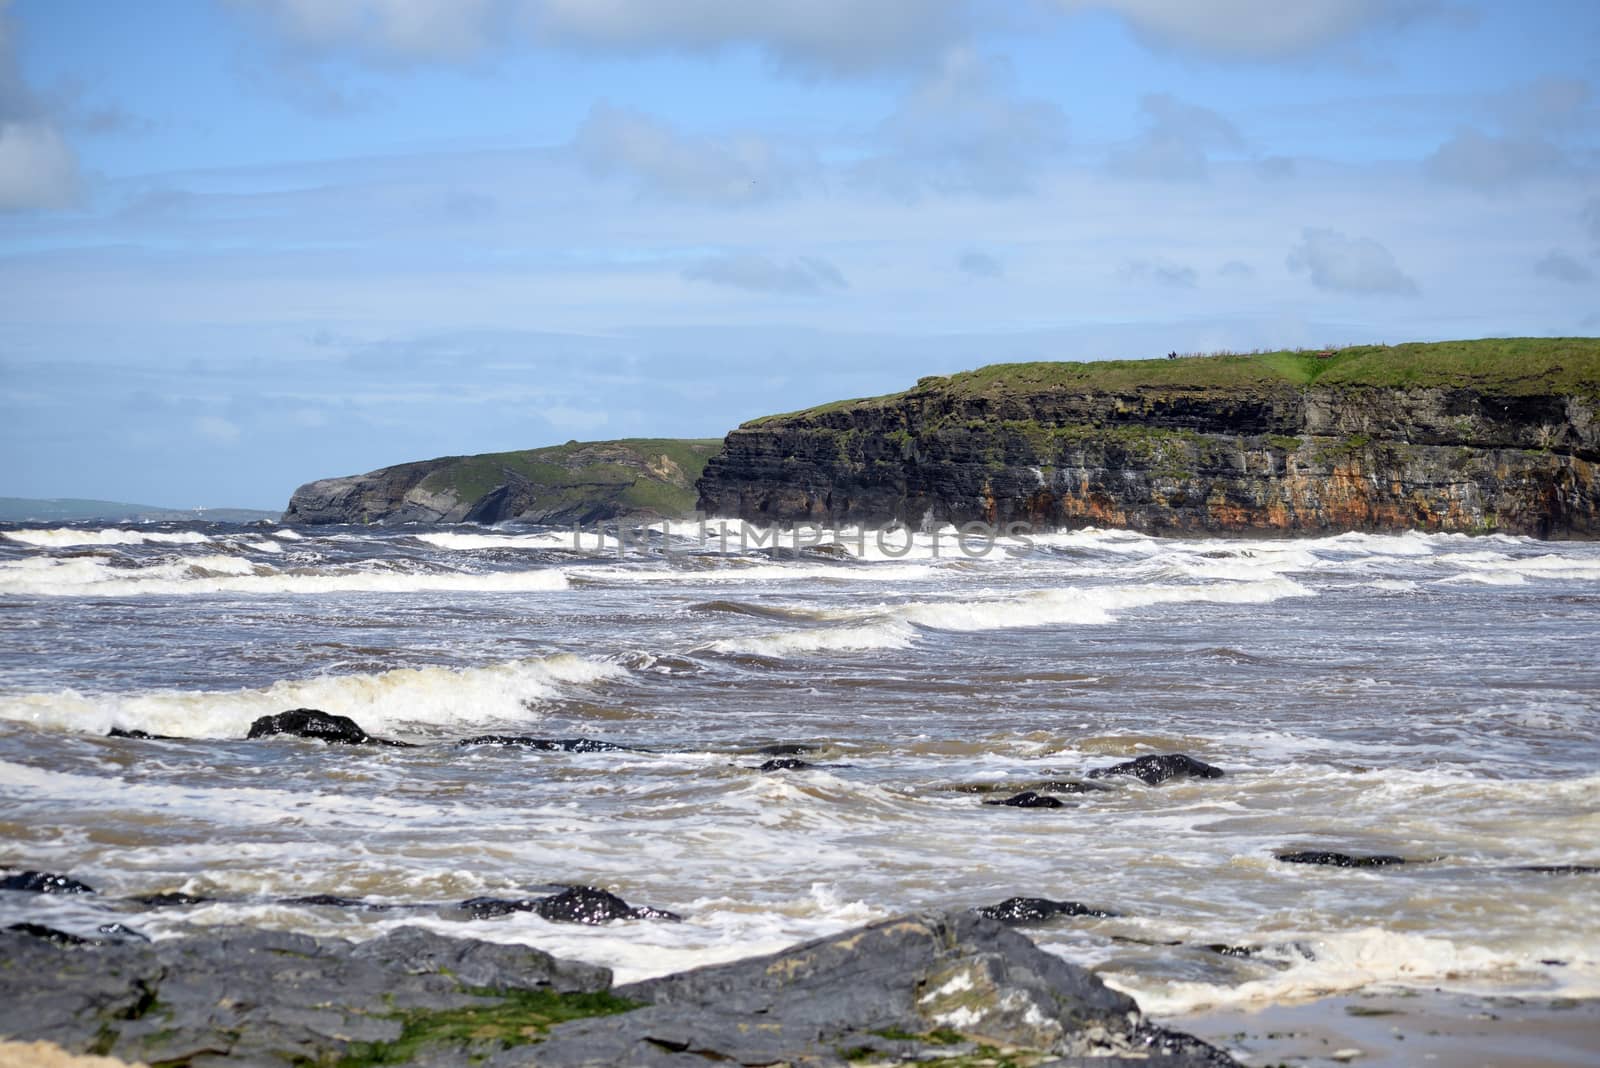 waves and cliffs on the wild atlantic way in Ballybunion county Kerry Ireland